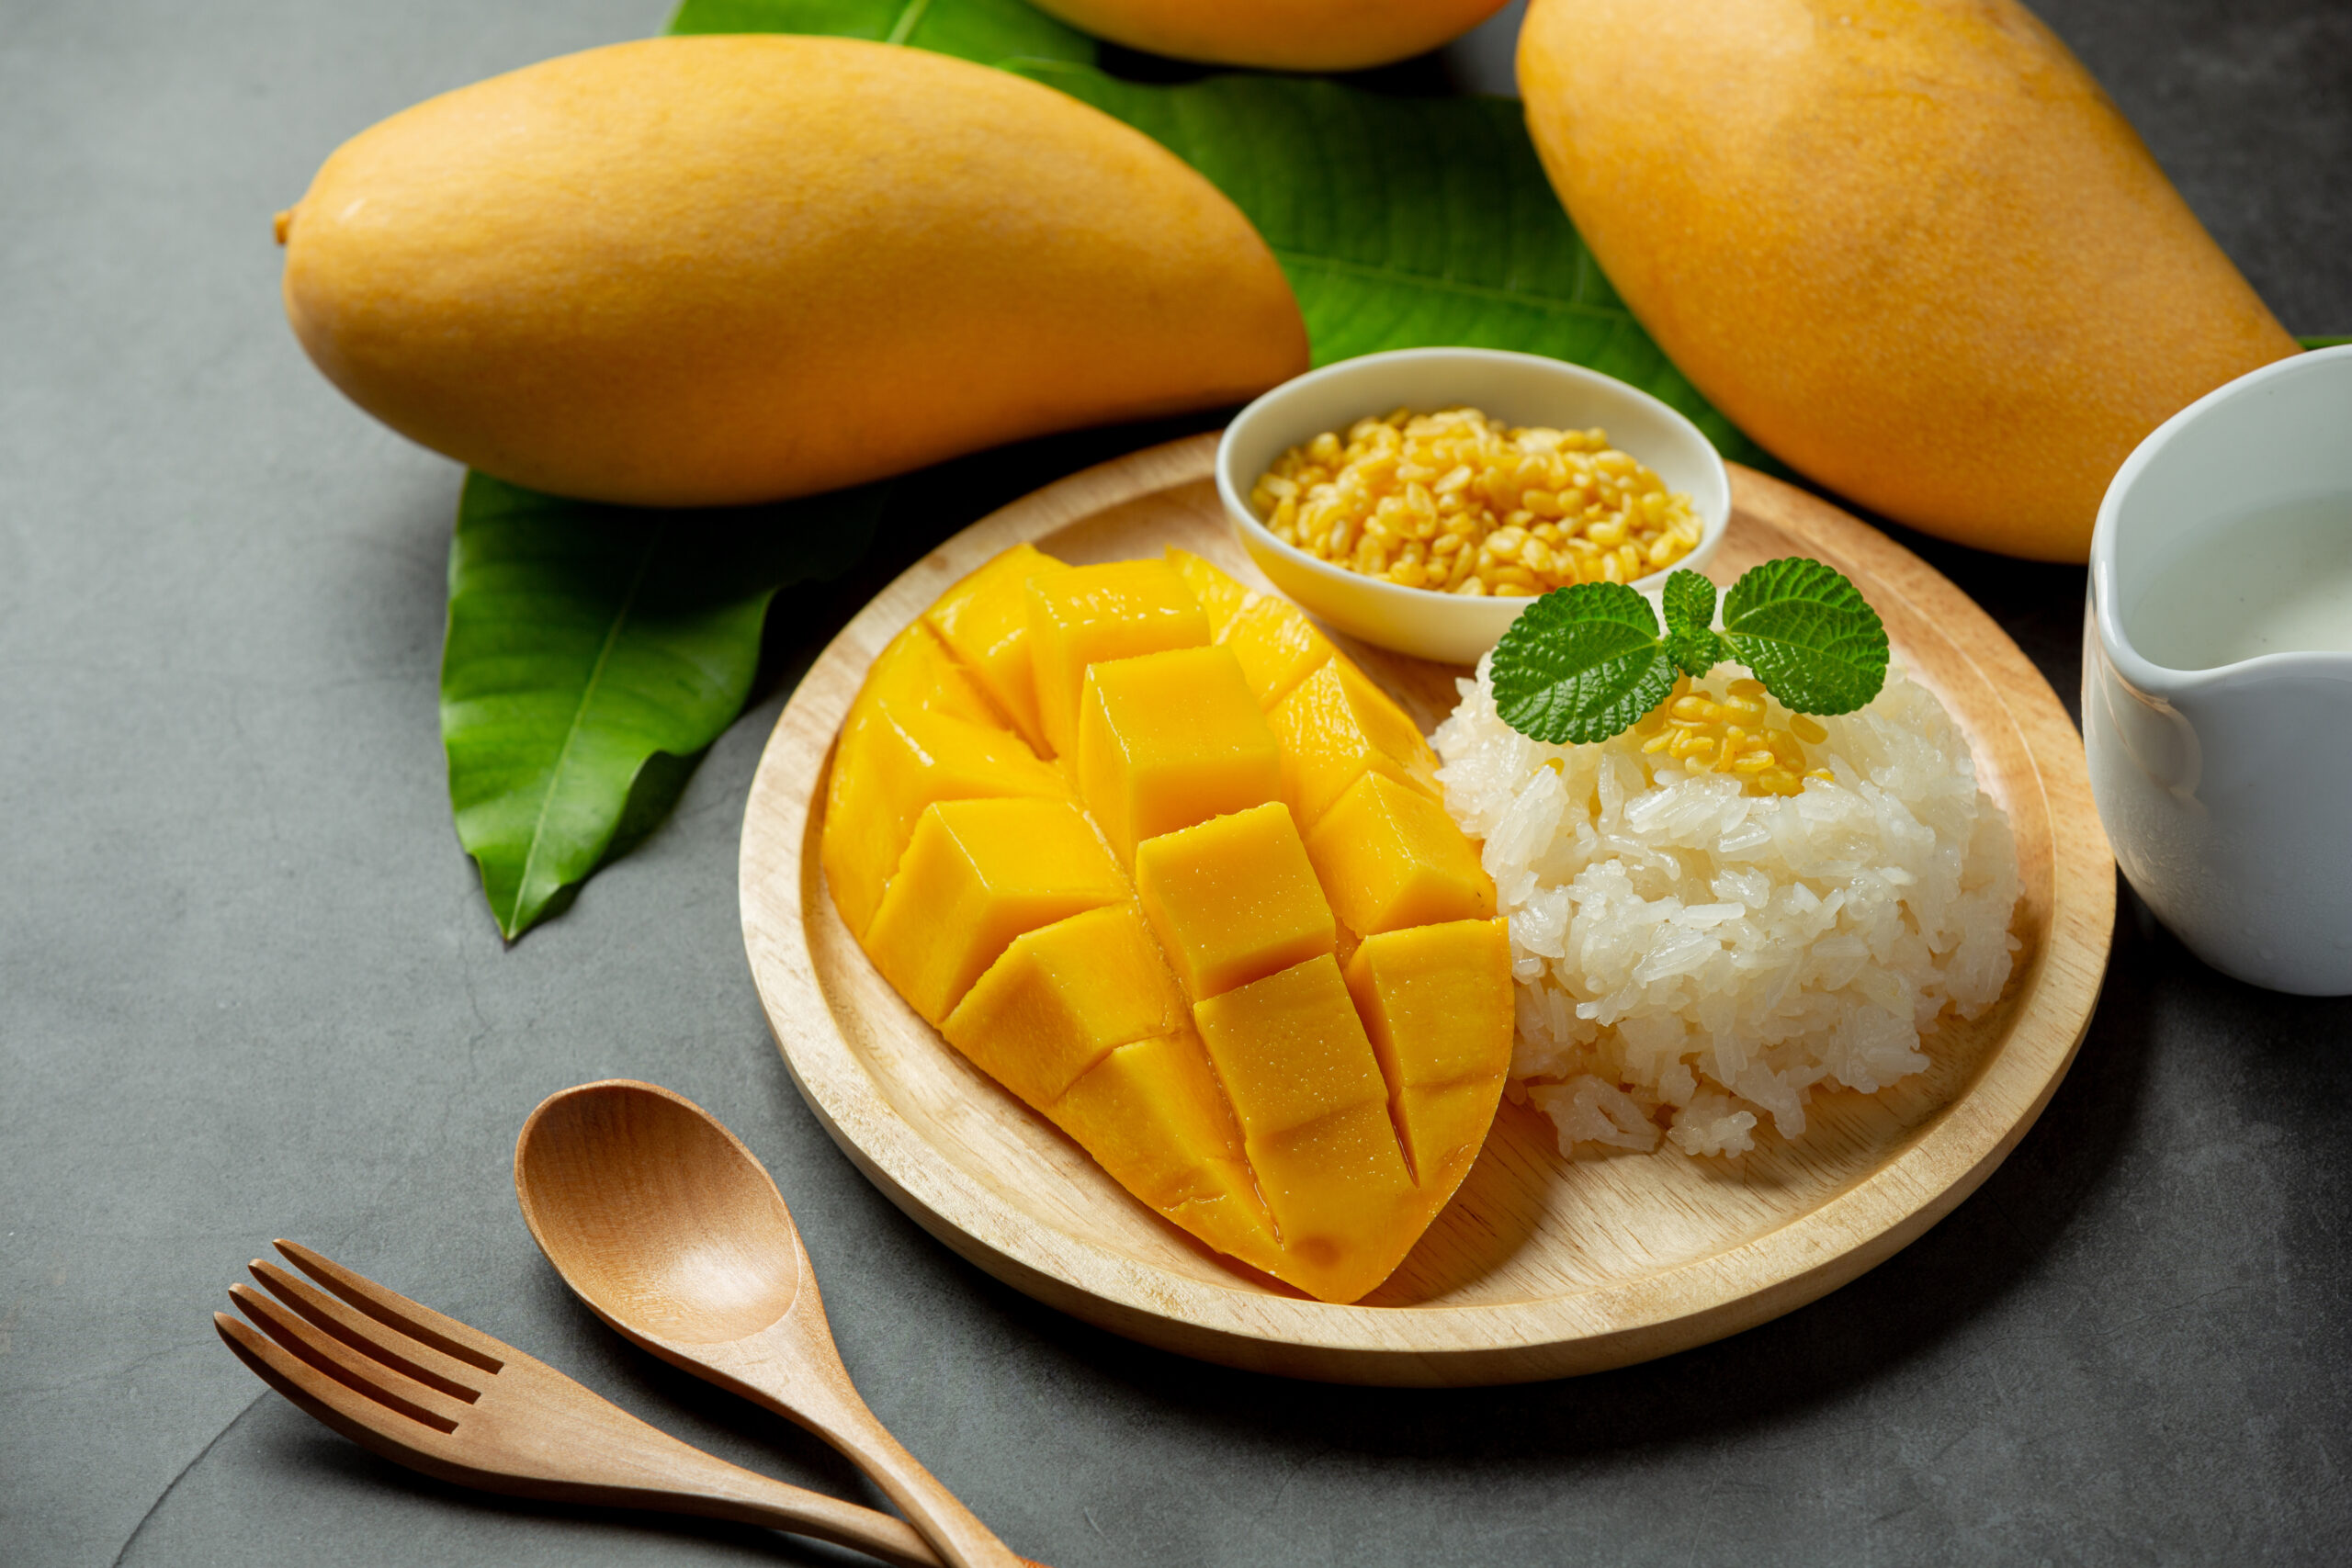 2. Did you know about this Mango festival in Bangalore?